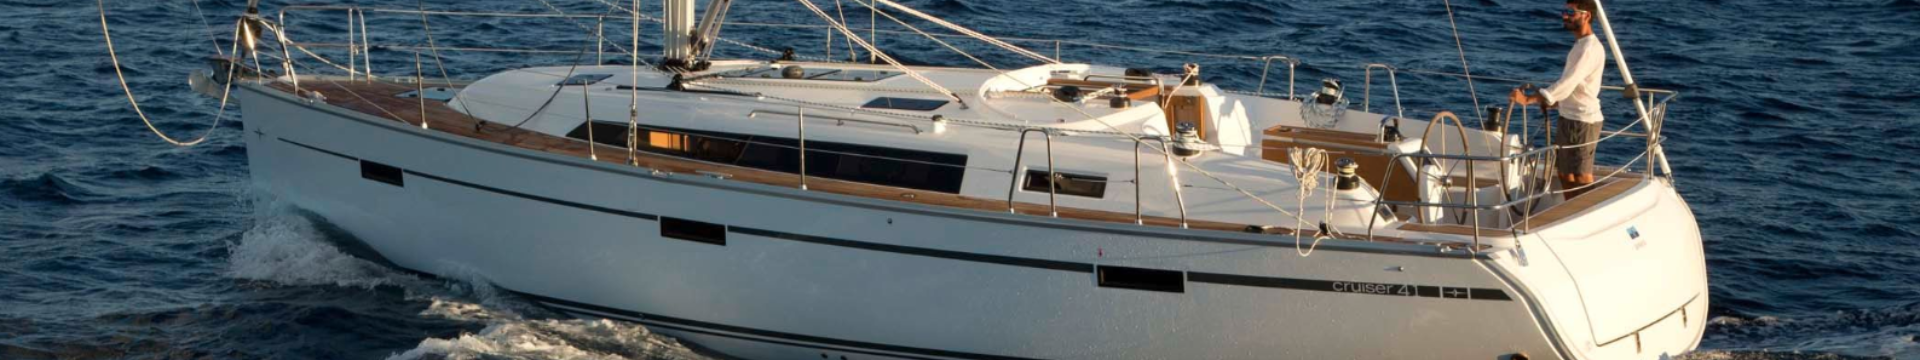 Bavaria Cruiser 41 Pearl Main picture for the desktop